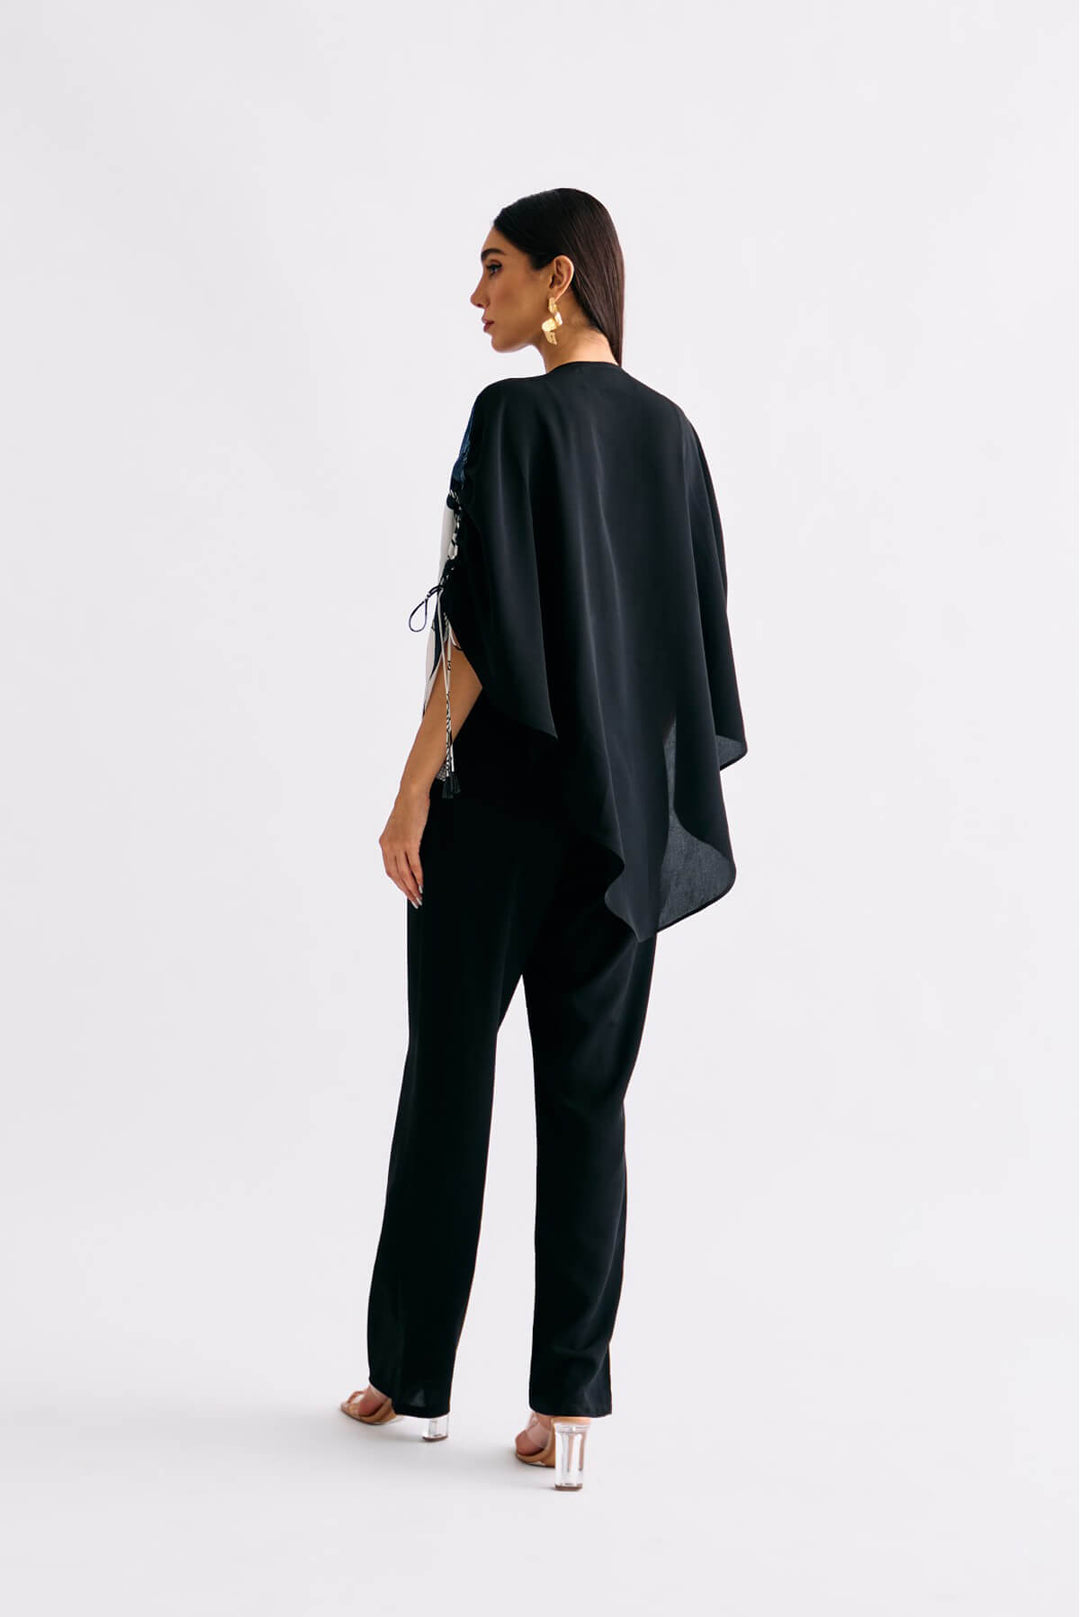 Kosey zip detailed cape top paired with slim fit pants